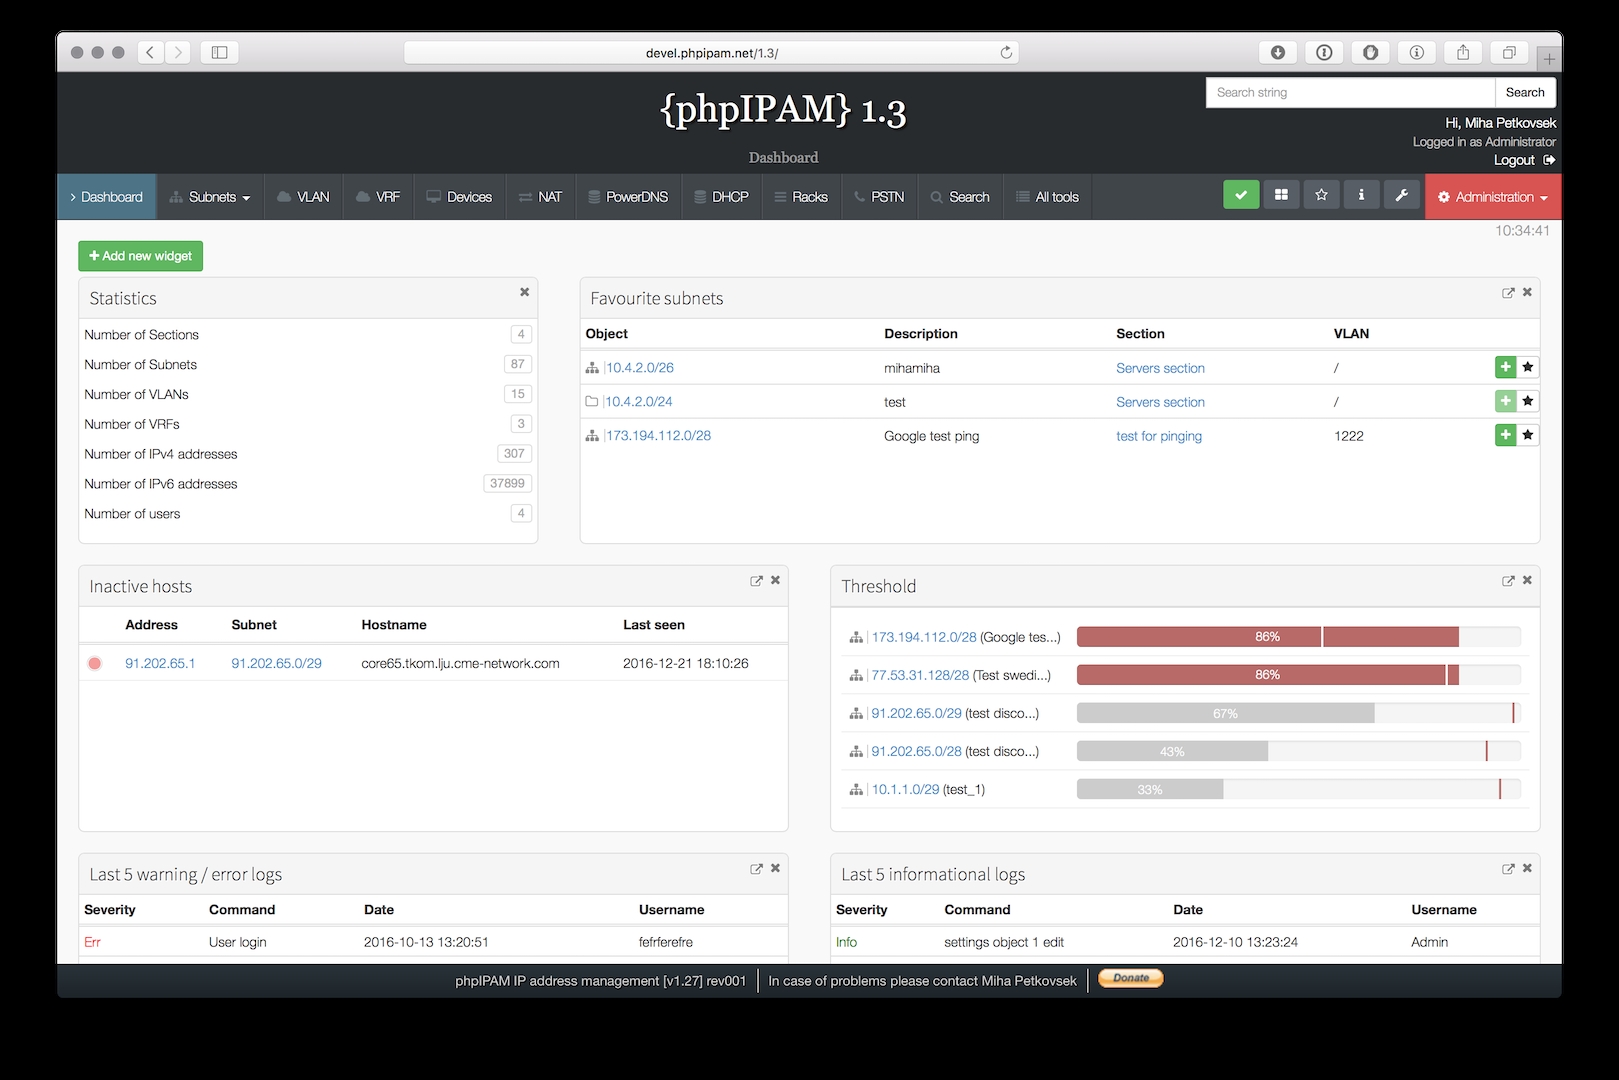 phpipam ipam ip address management software evidence management system open source